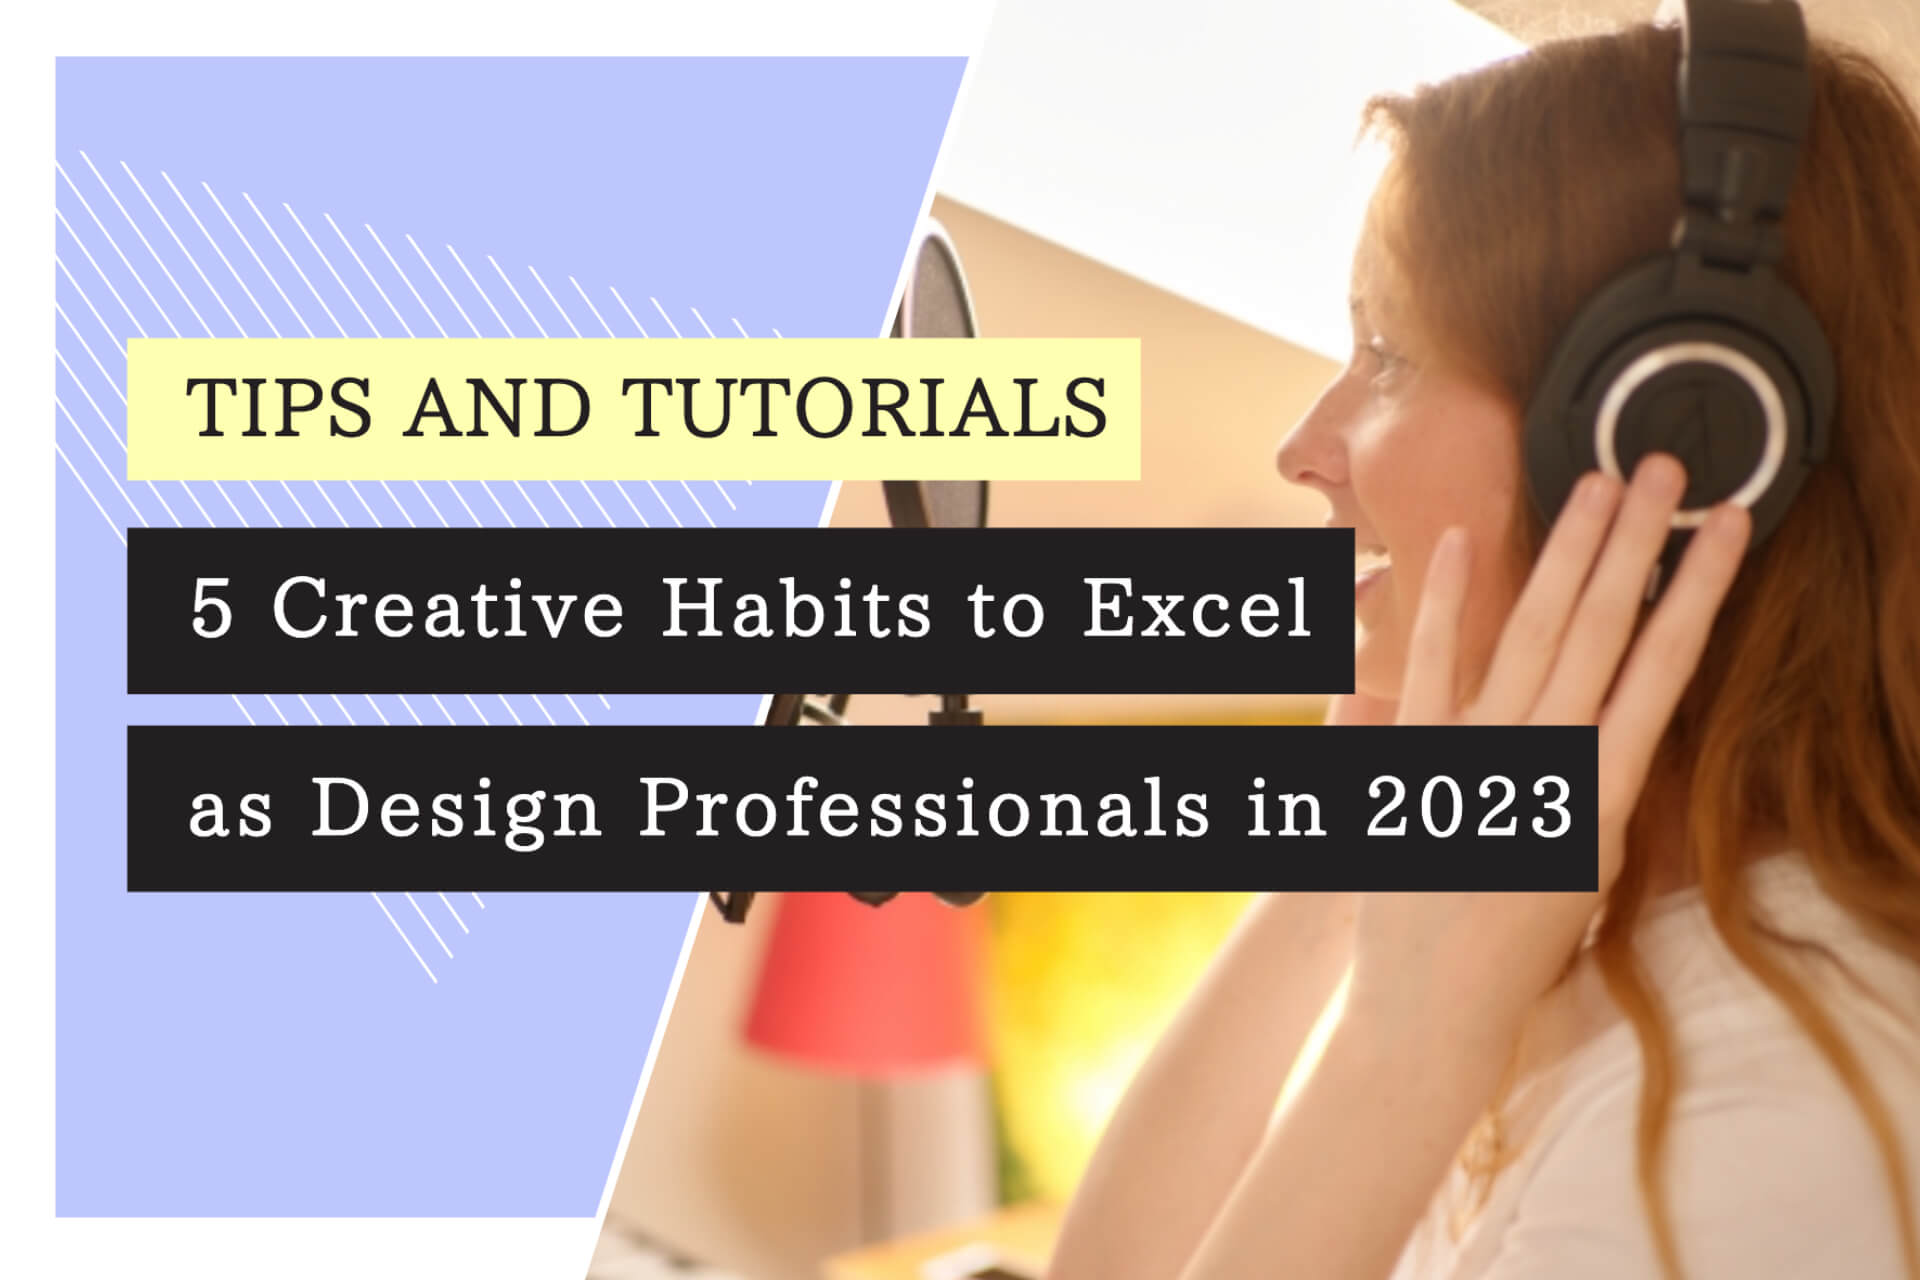 5 Creative Habits to Excel as Design Professionals in 2023